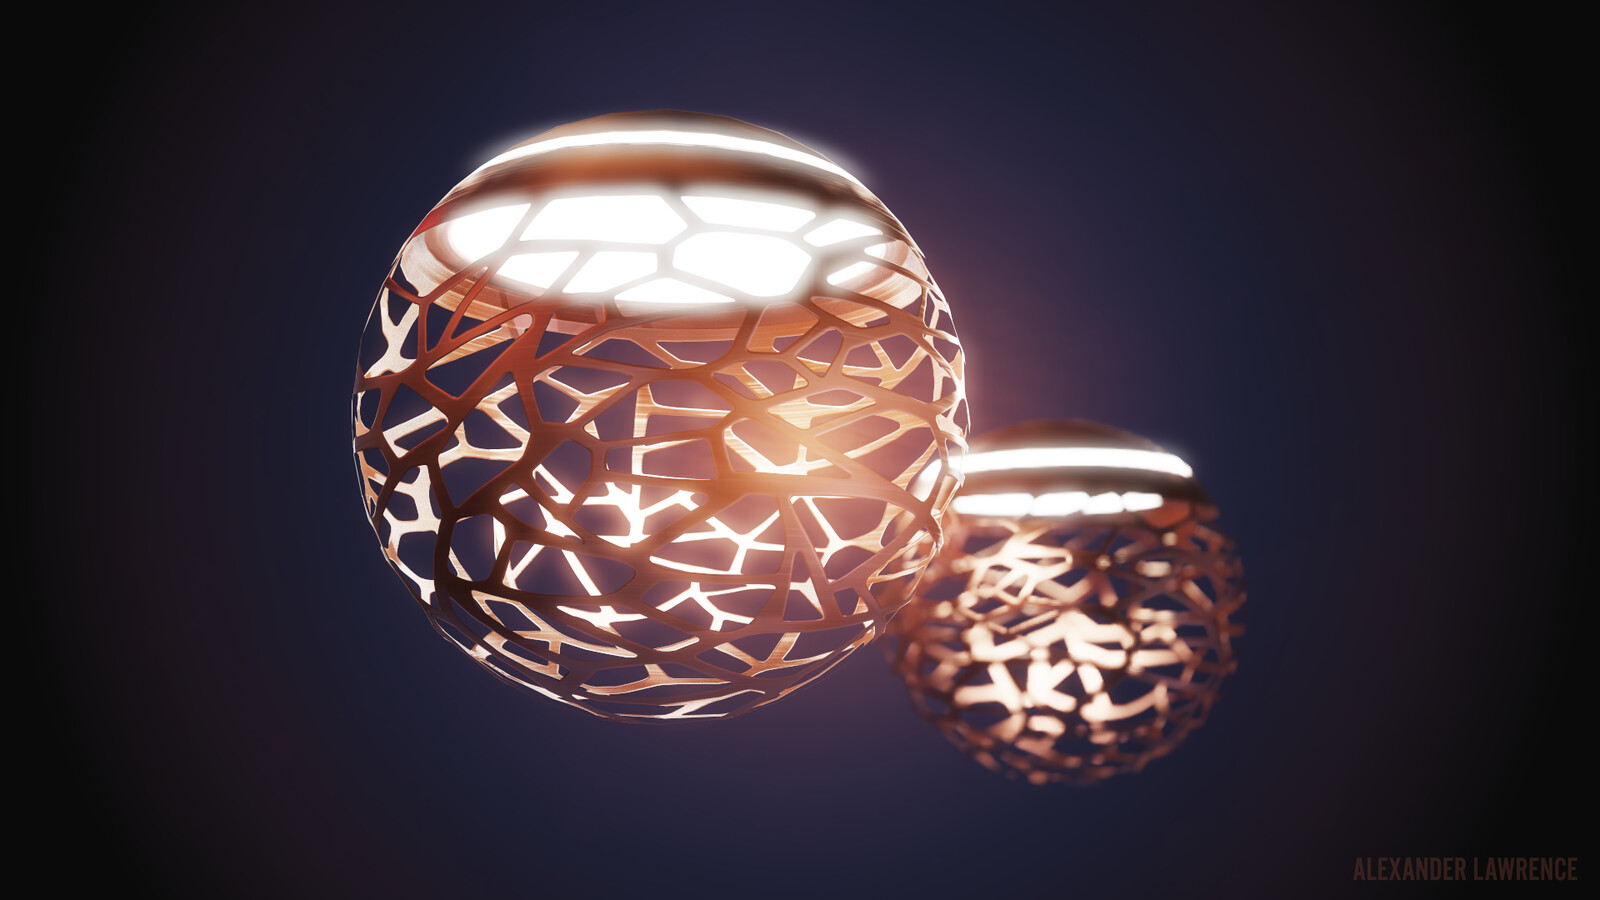 Floating lamps beauty shot (rendered in Marmoset Toolbag)